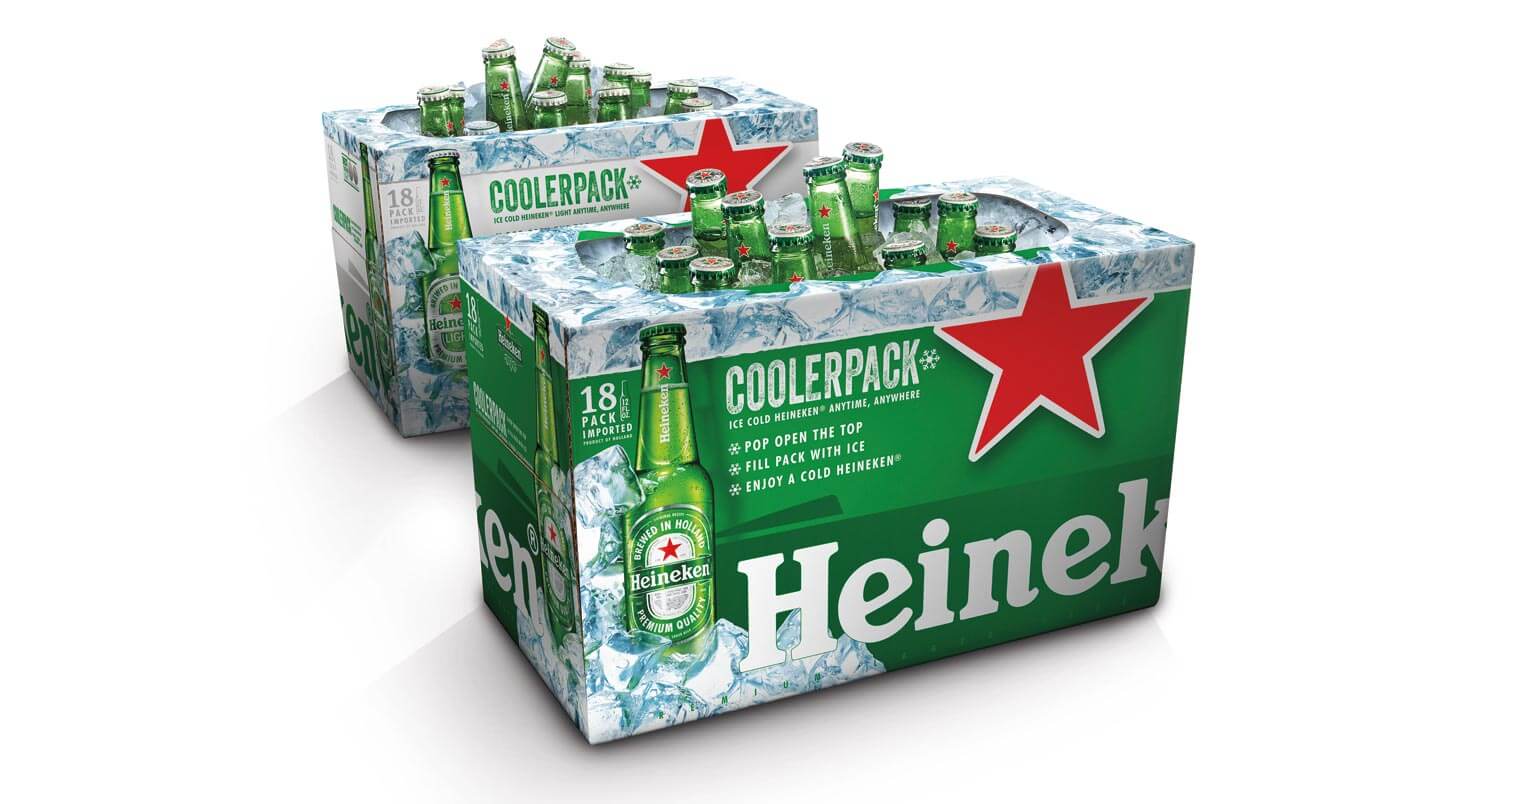 Heineken Launches the Coolerpack, featured image